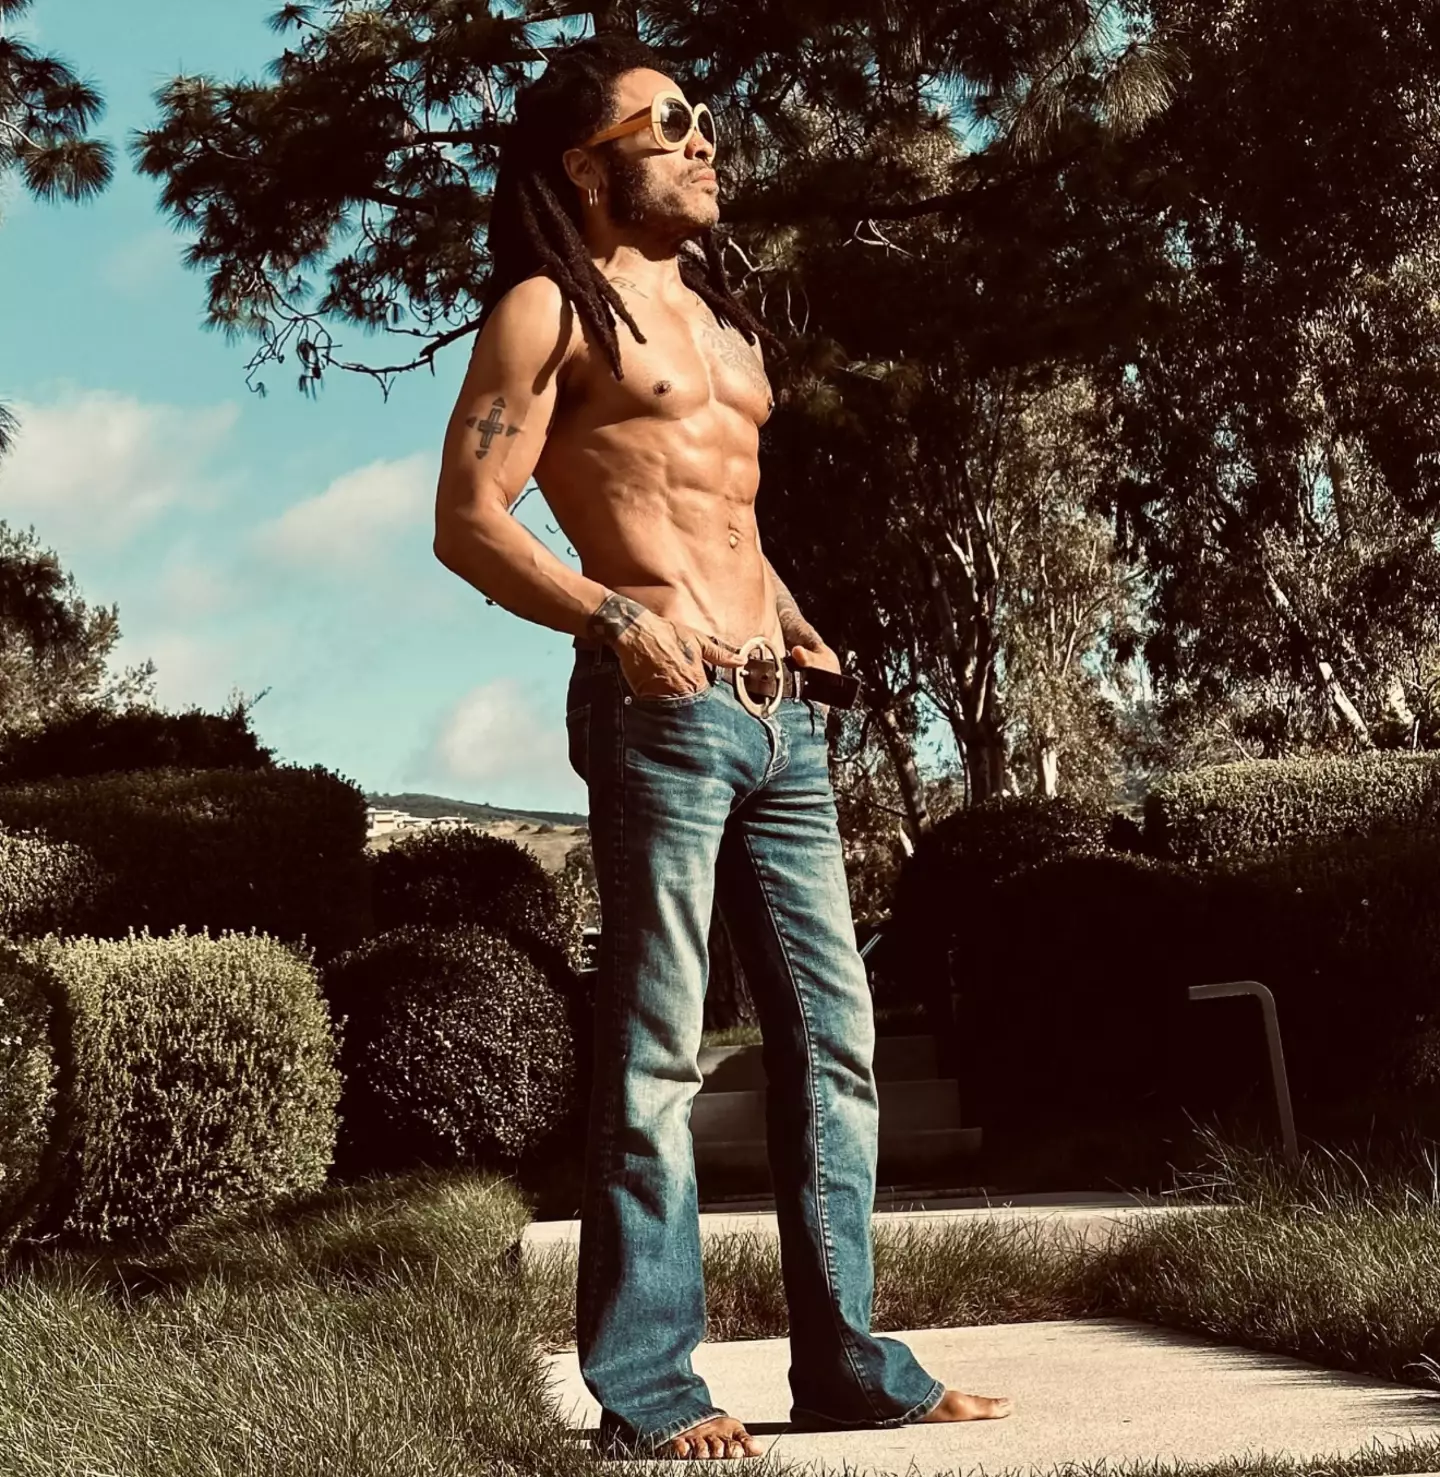 Lenny Kravitz wowed fans with his latest Instagram post.